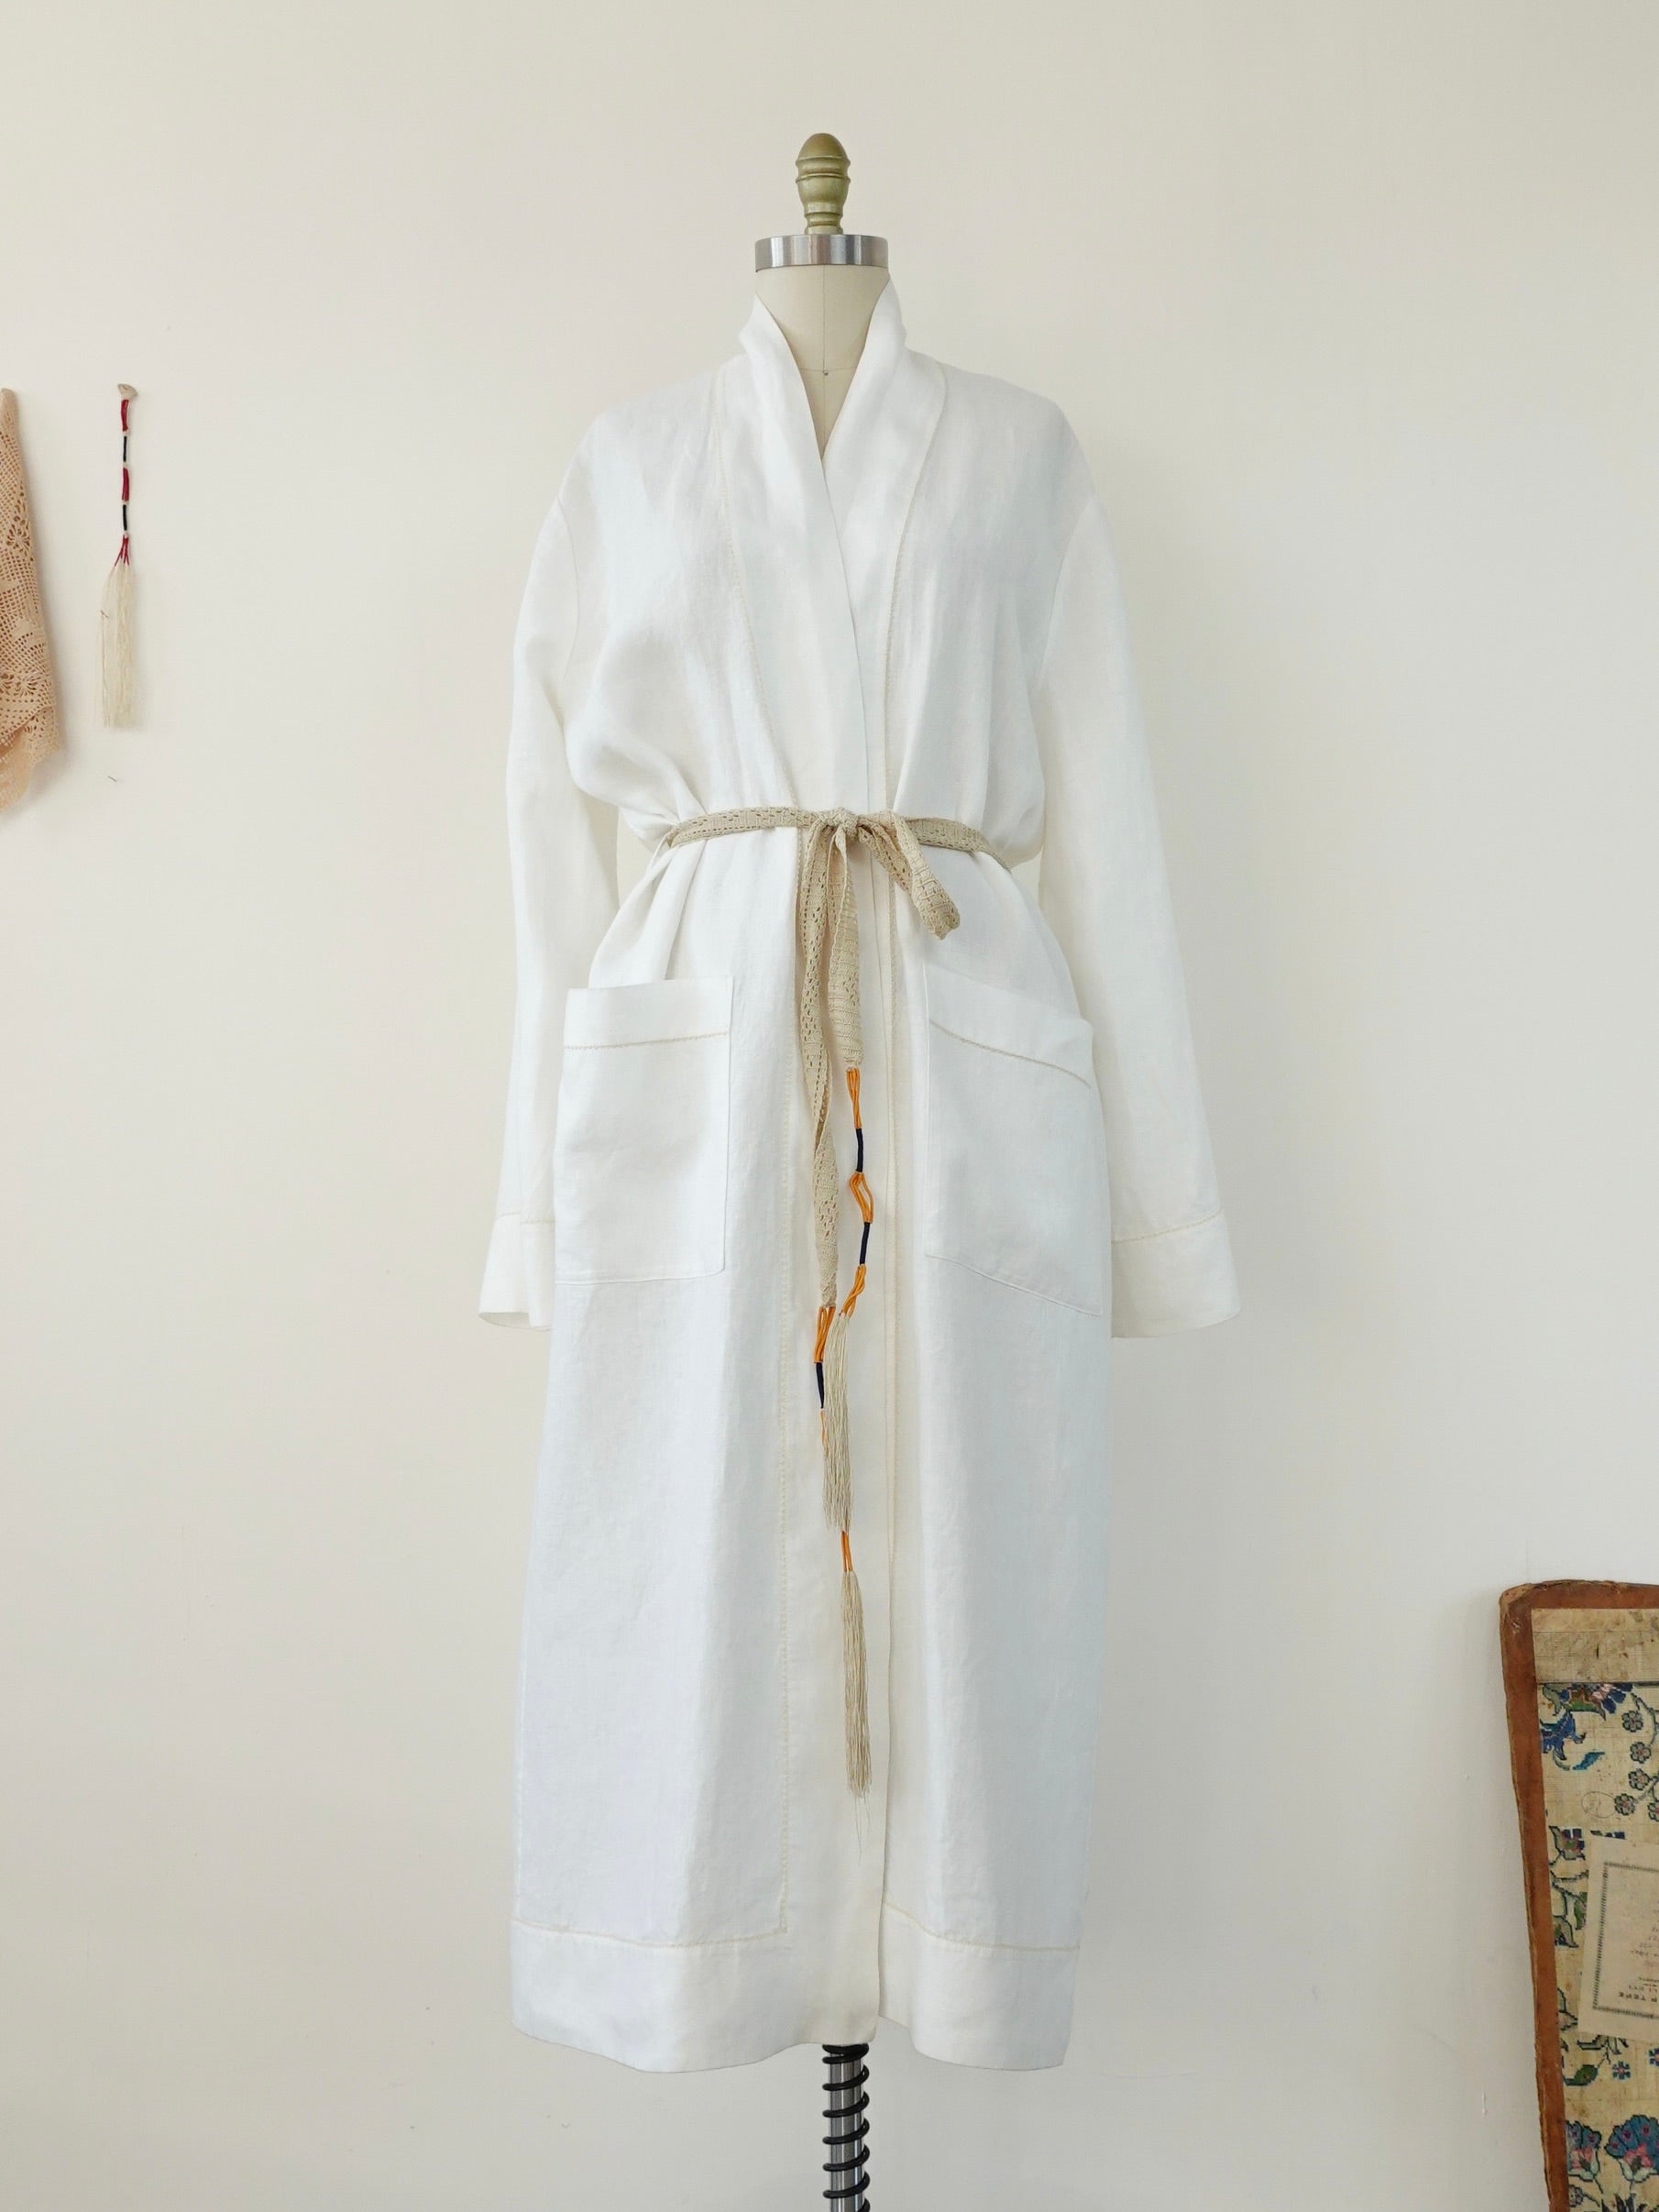 Robe Cerva with belt Ottoman in Beige with Safran and navy detail